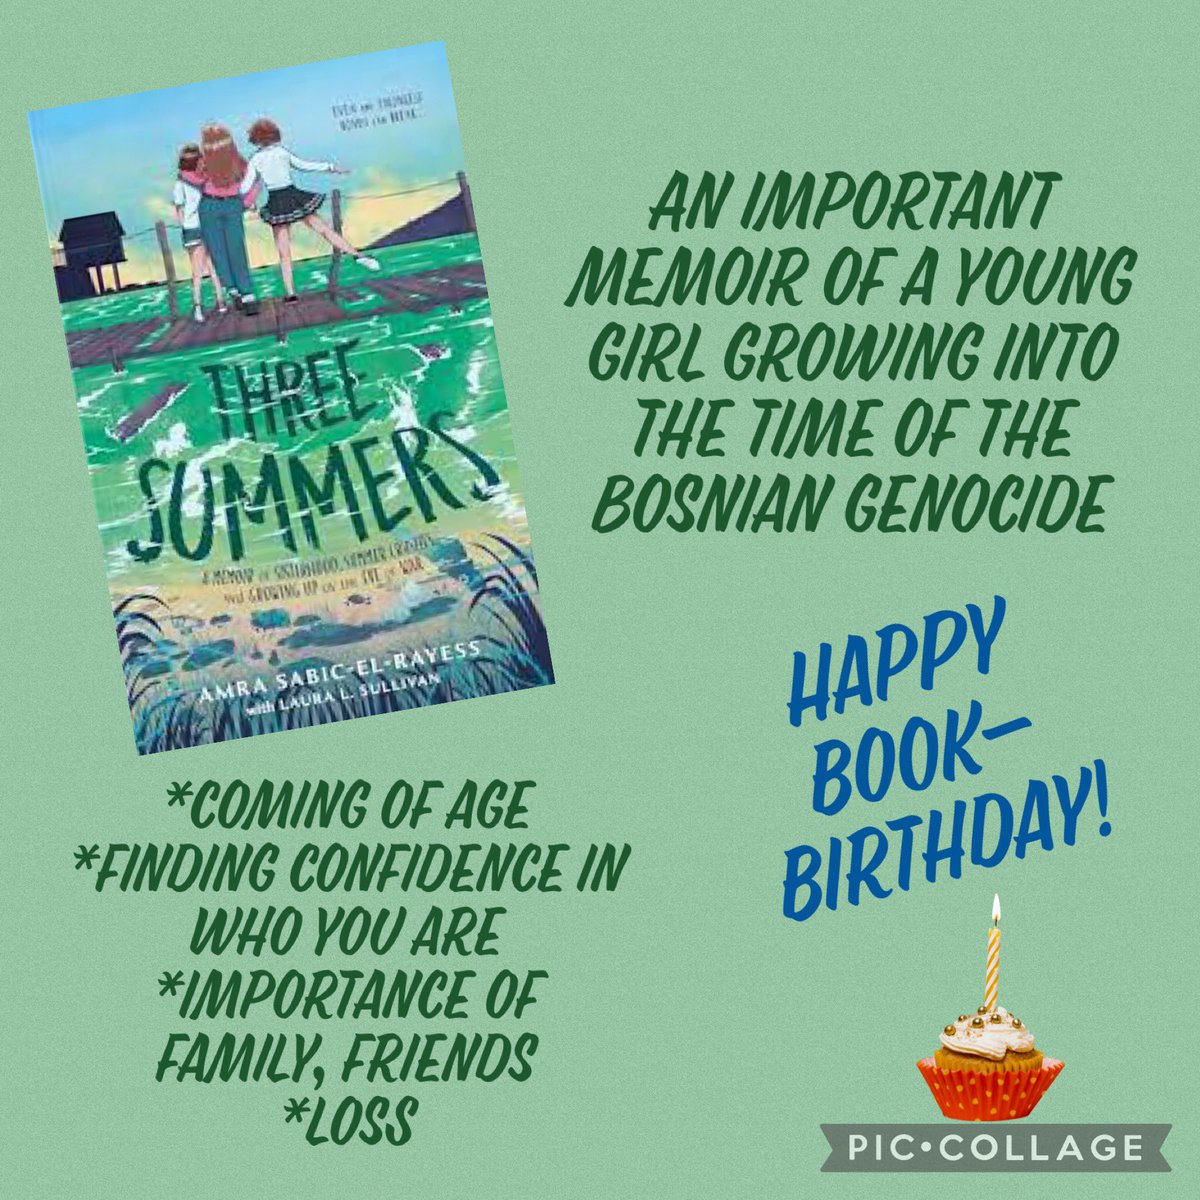 Happy book-birthday, @amrasabicPHD and THREE SUMMERS! I loved this historical fiction about a time that most lack any real knowledge plus themes about strong family ties and supporting one another. @fsgbooks #BookAllies